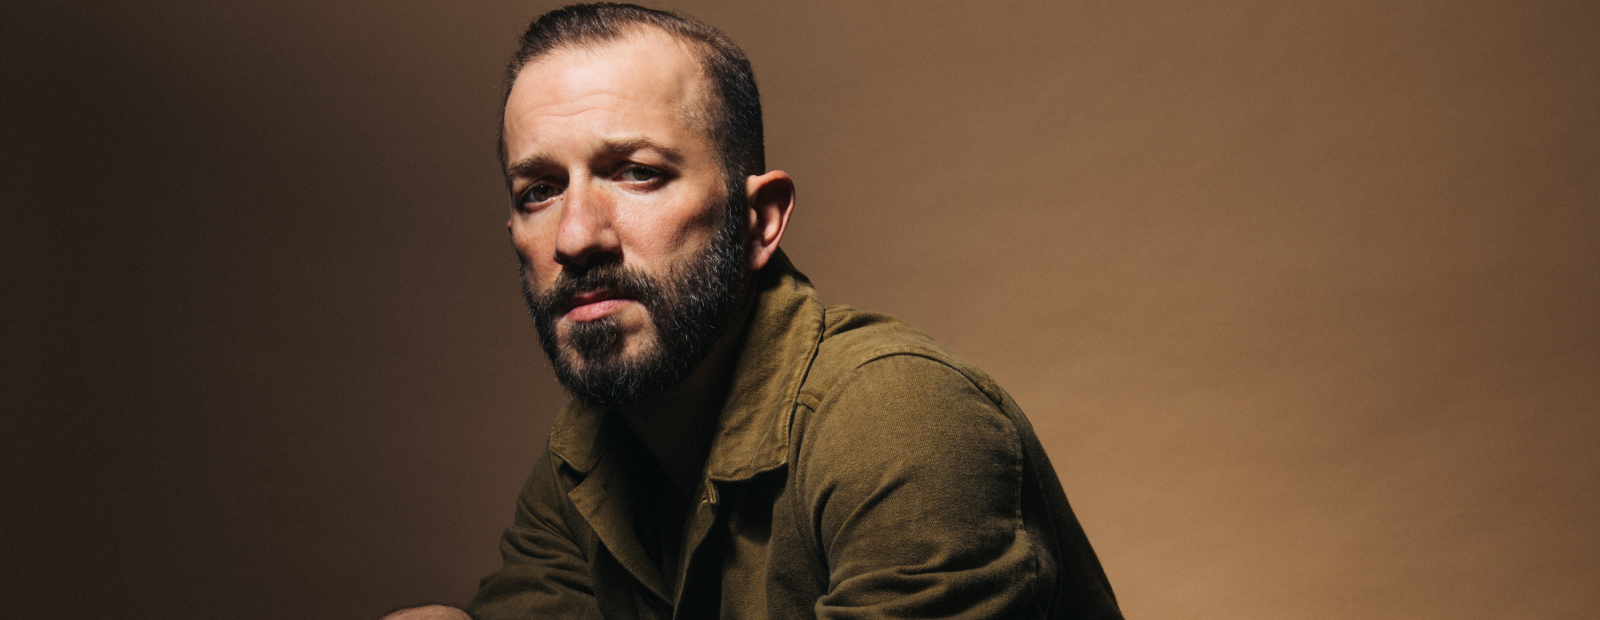 Colin Stetson: The Avant-Garde Saxophonist and Musical Collaborator